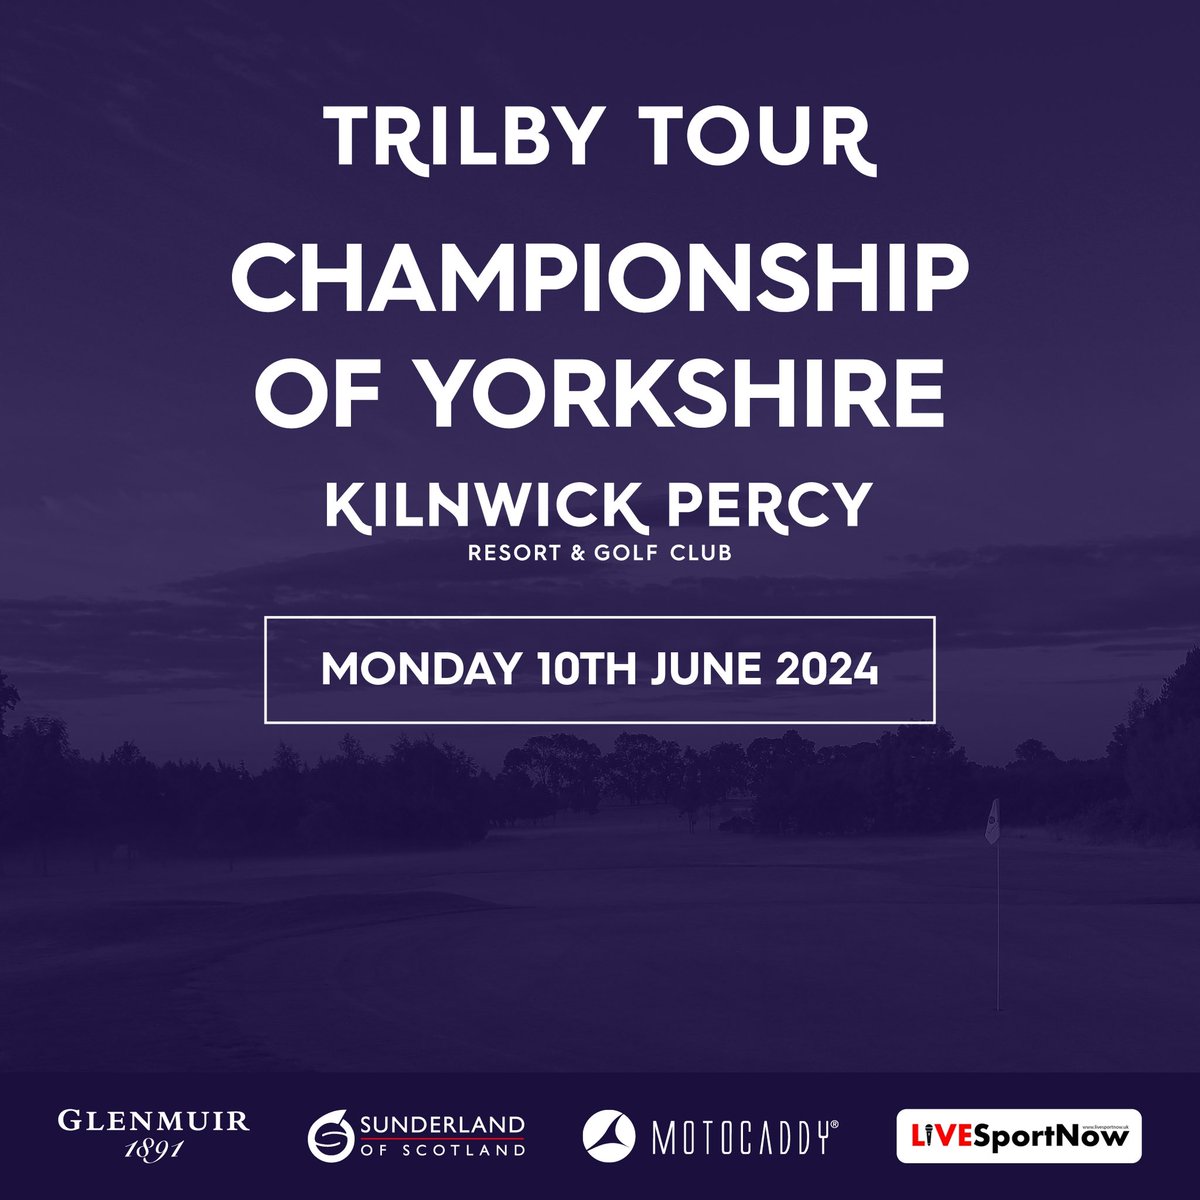 CHAMPIONSHIP OF YORKSHIRE Second up on this year’s Trilby Tour 2024 schedule is the iconic Championship of Yorkshire at @KilnwickPercyGC. With spots filling up fast, sign up for Kilnwick Percy Resort & Golf Club now plus our other events ⤵️ 🌐 trilbytour.co.uk